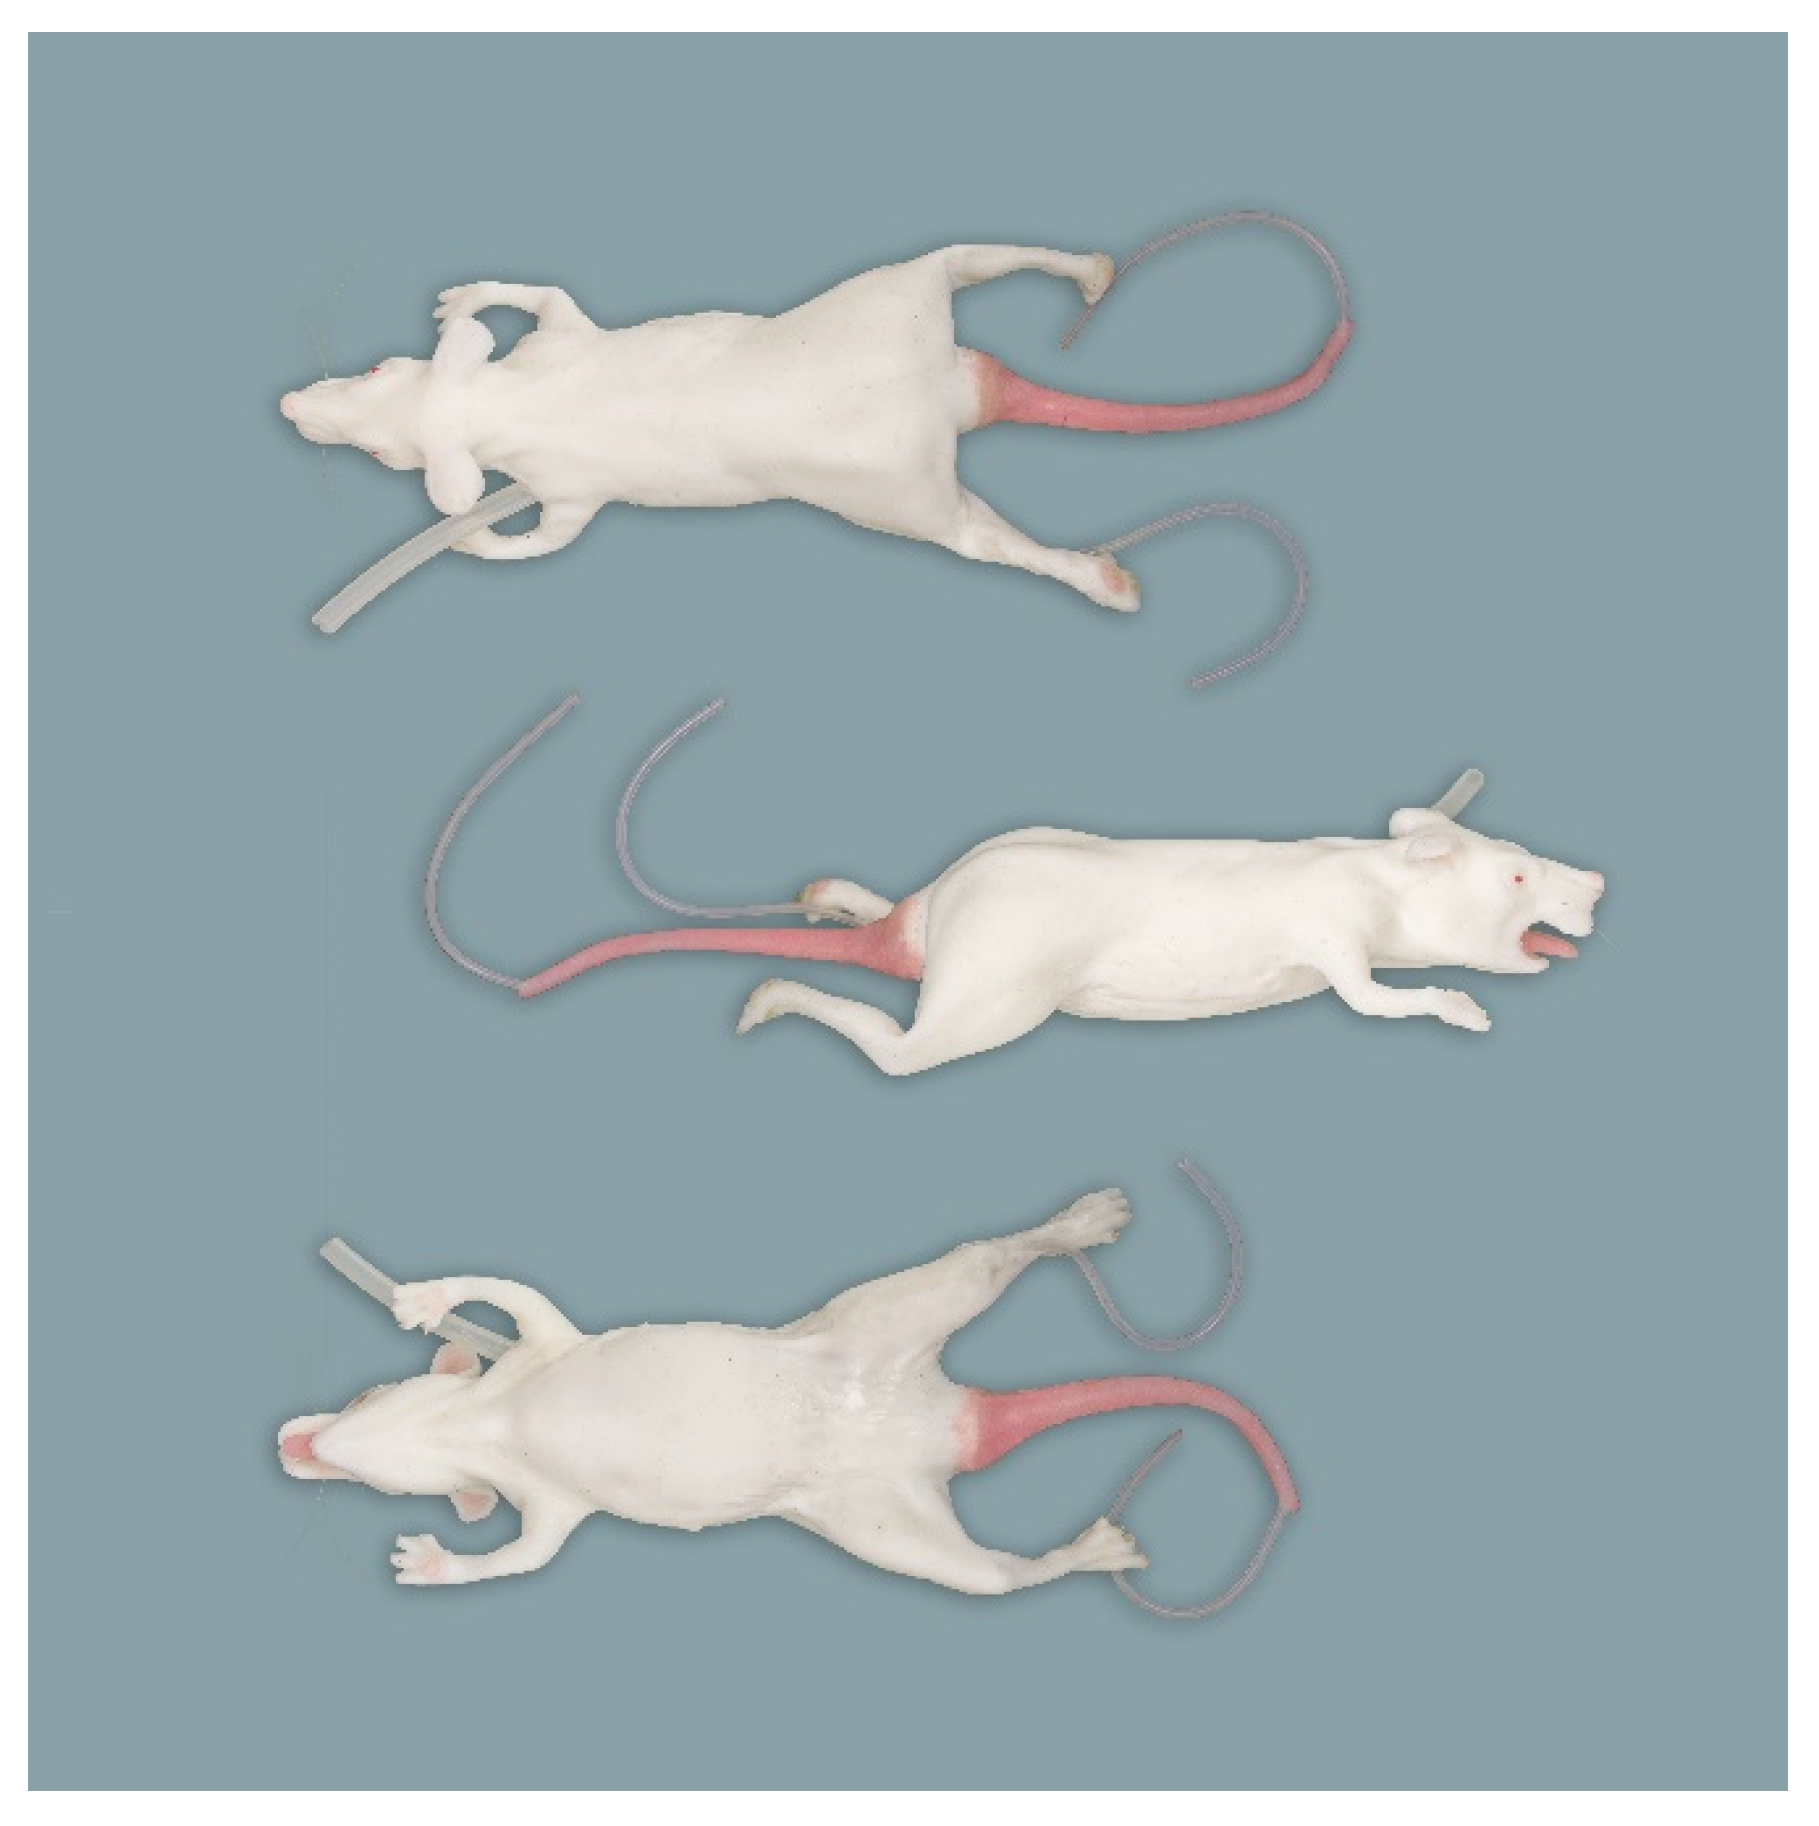 Animals | Free Full-Text | Anatomical Evaluation of Rat and Mouse  Simulators for Laboratory Animal Science Courses